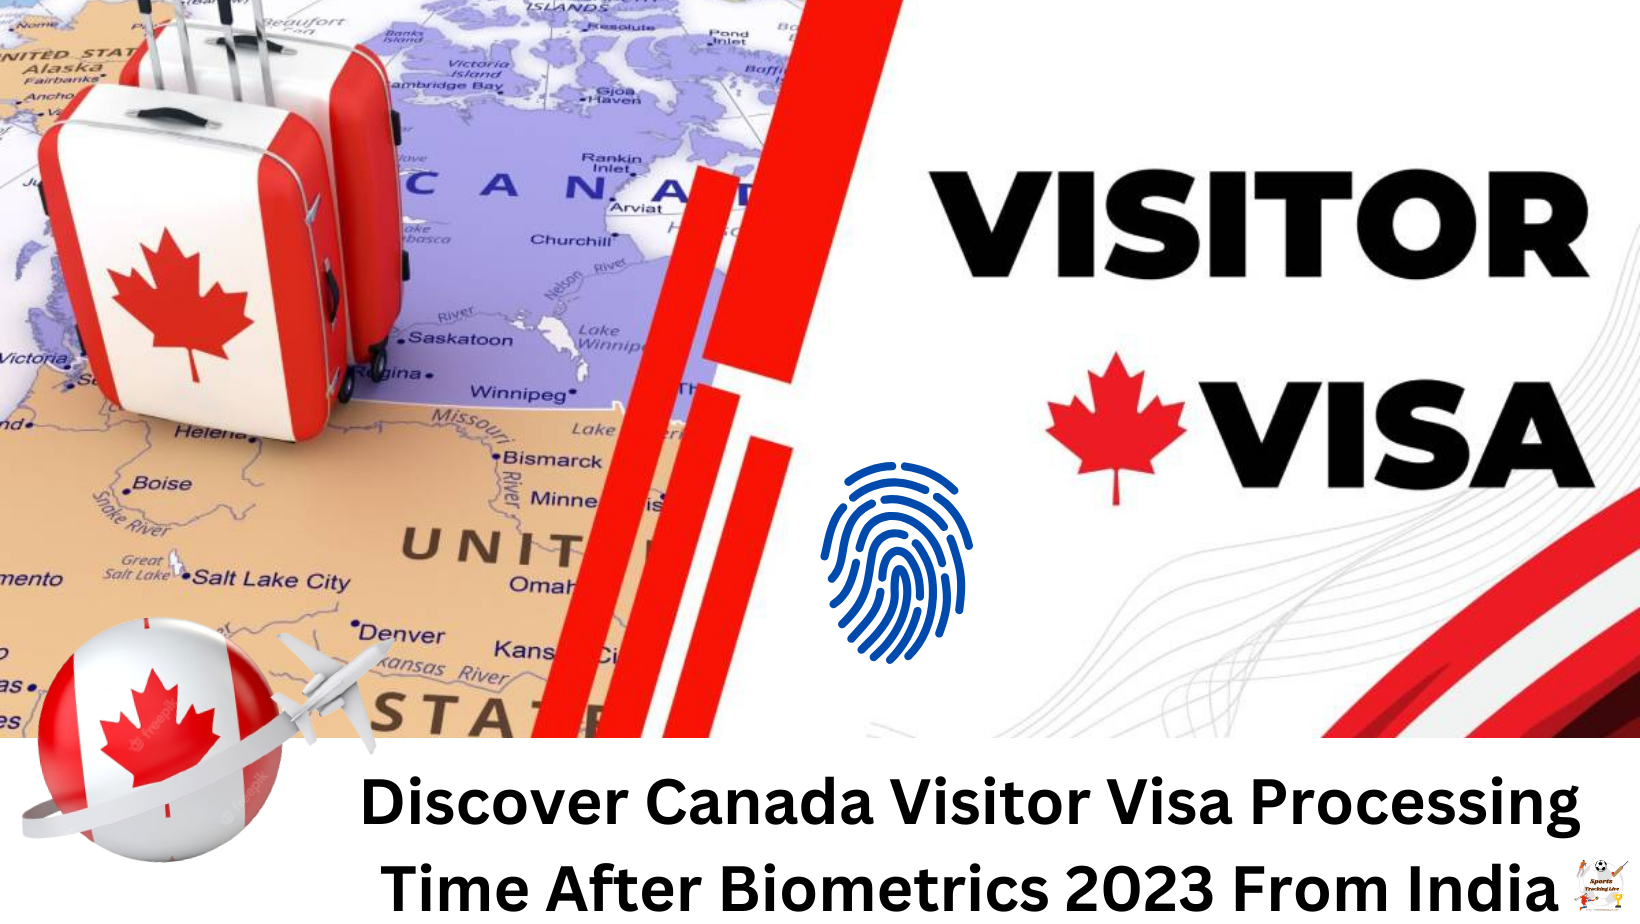 Discover Canada Visitor Visa Processing Time After Biometrics 2023 From India